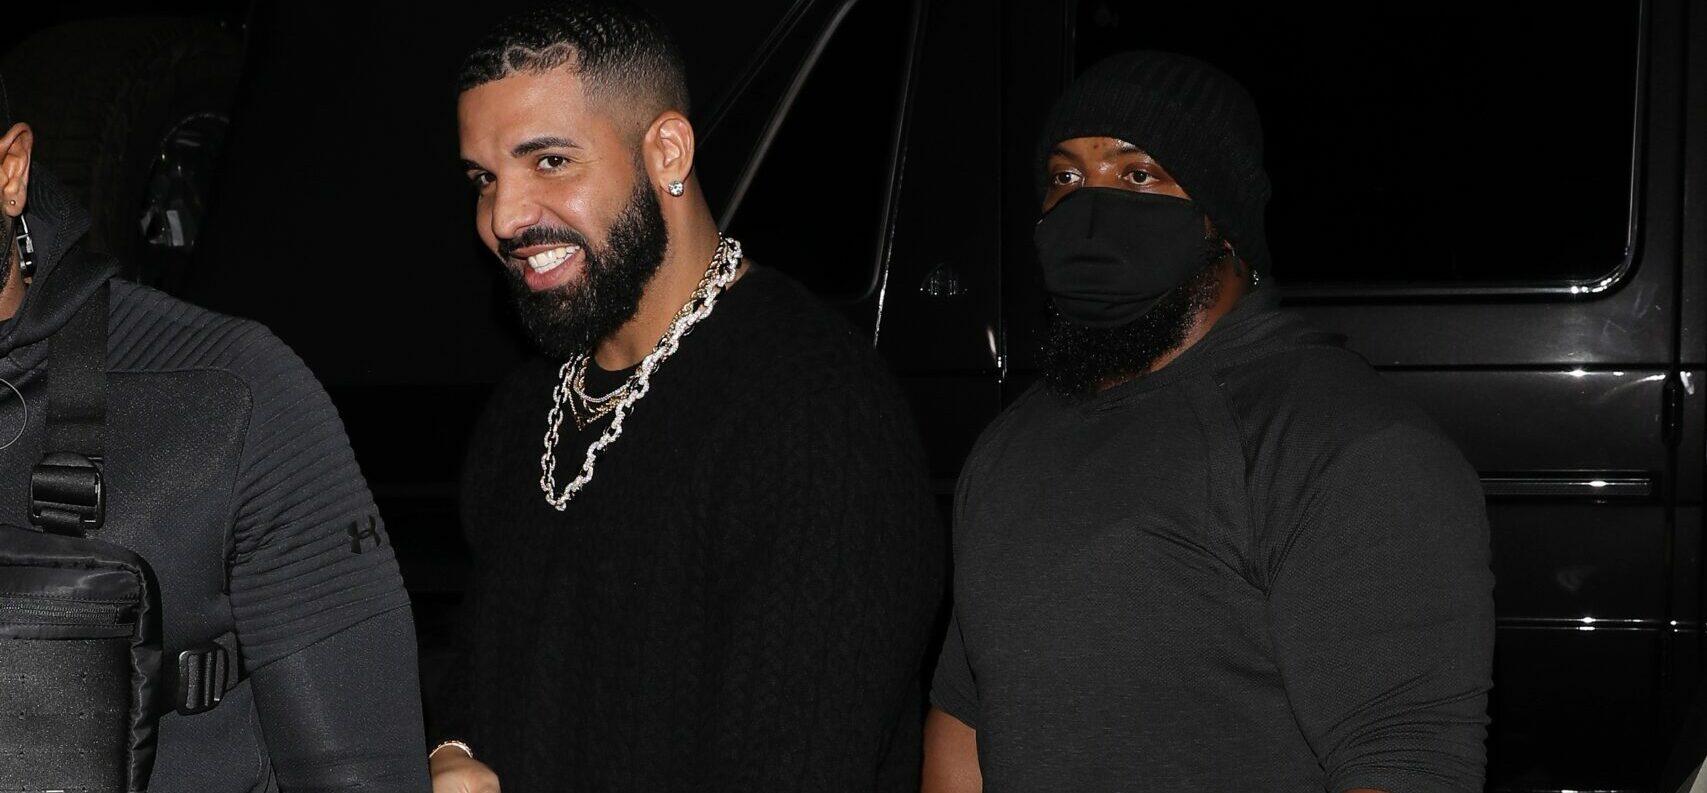 Rapper Drake is all smiles as he heads to the Nice Guy Restaurant to party